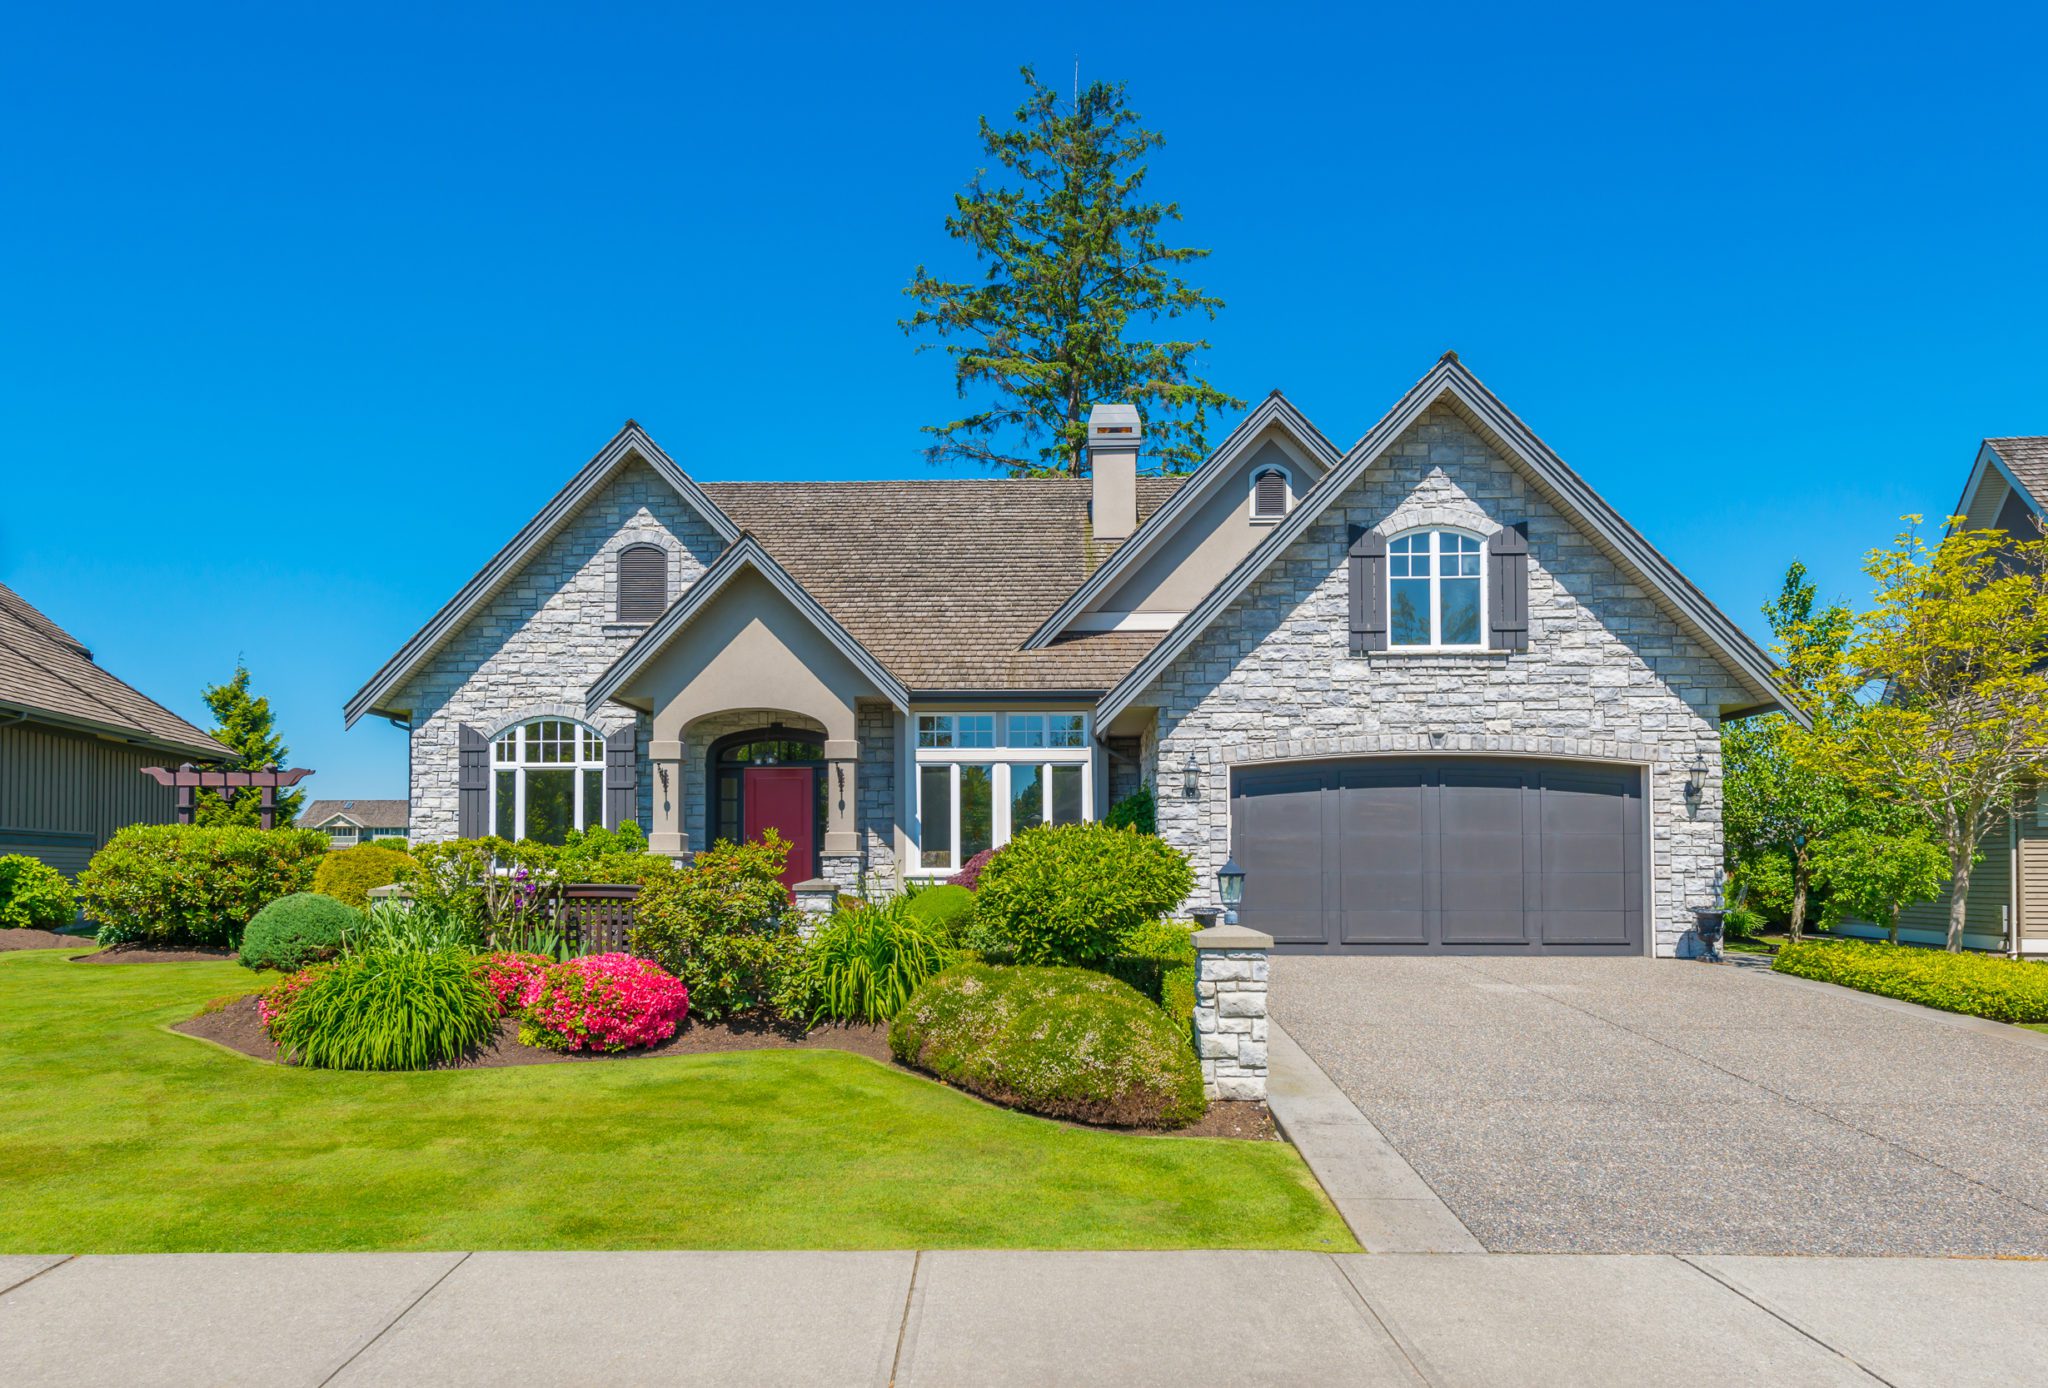 Visiting Homes: What You Need To Know To Avoid Buyer’s Remorse